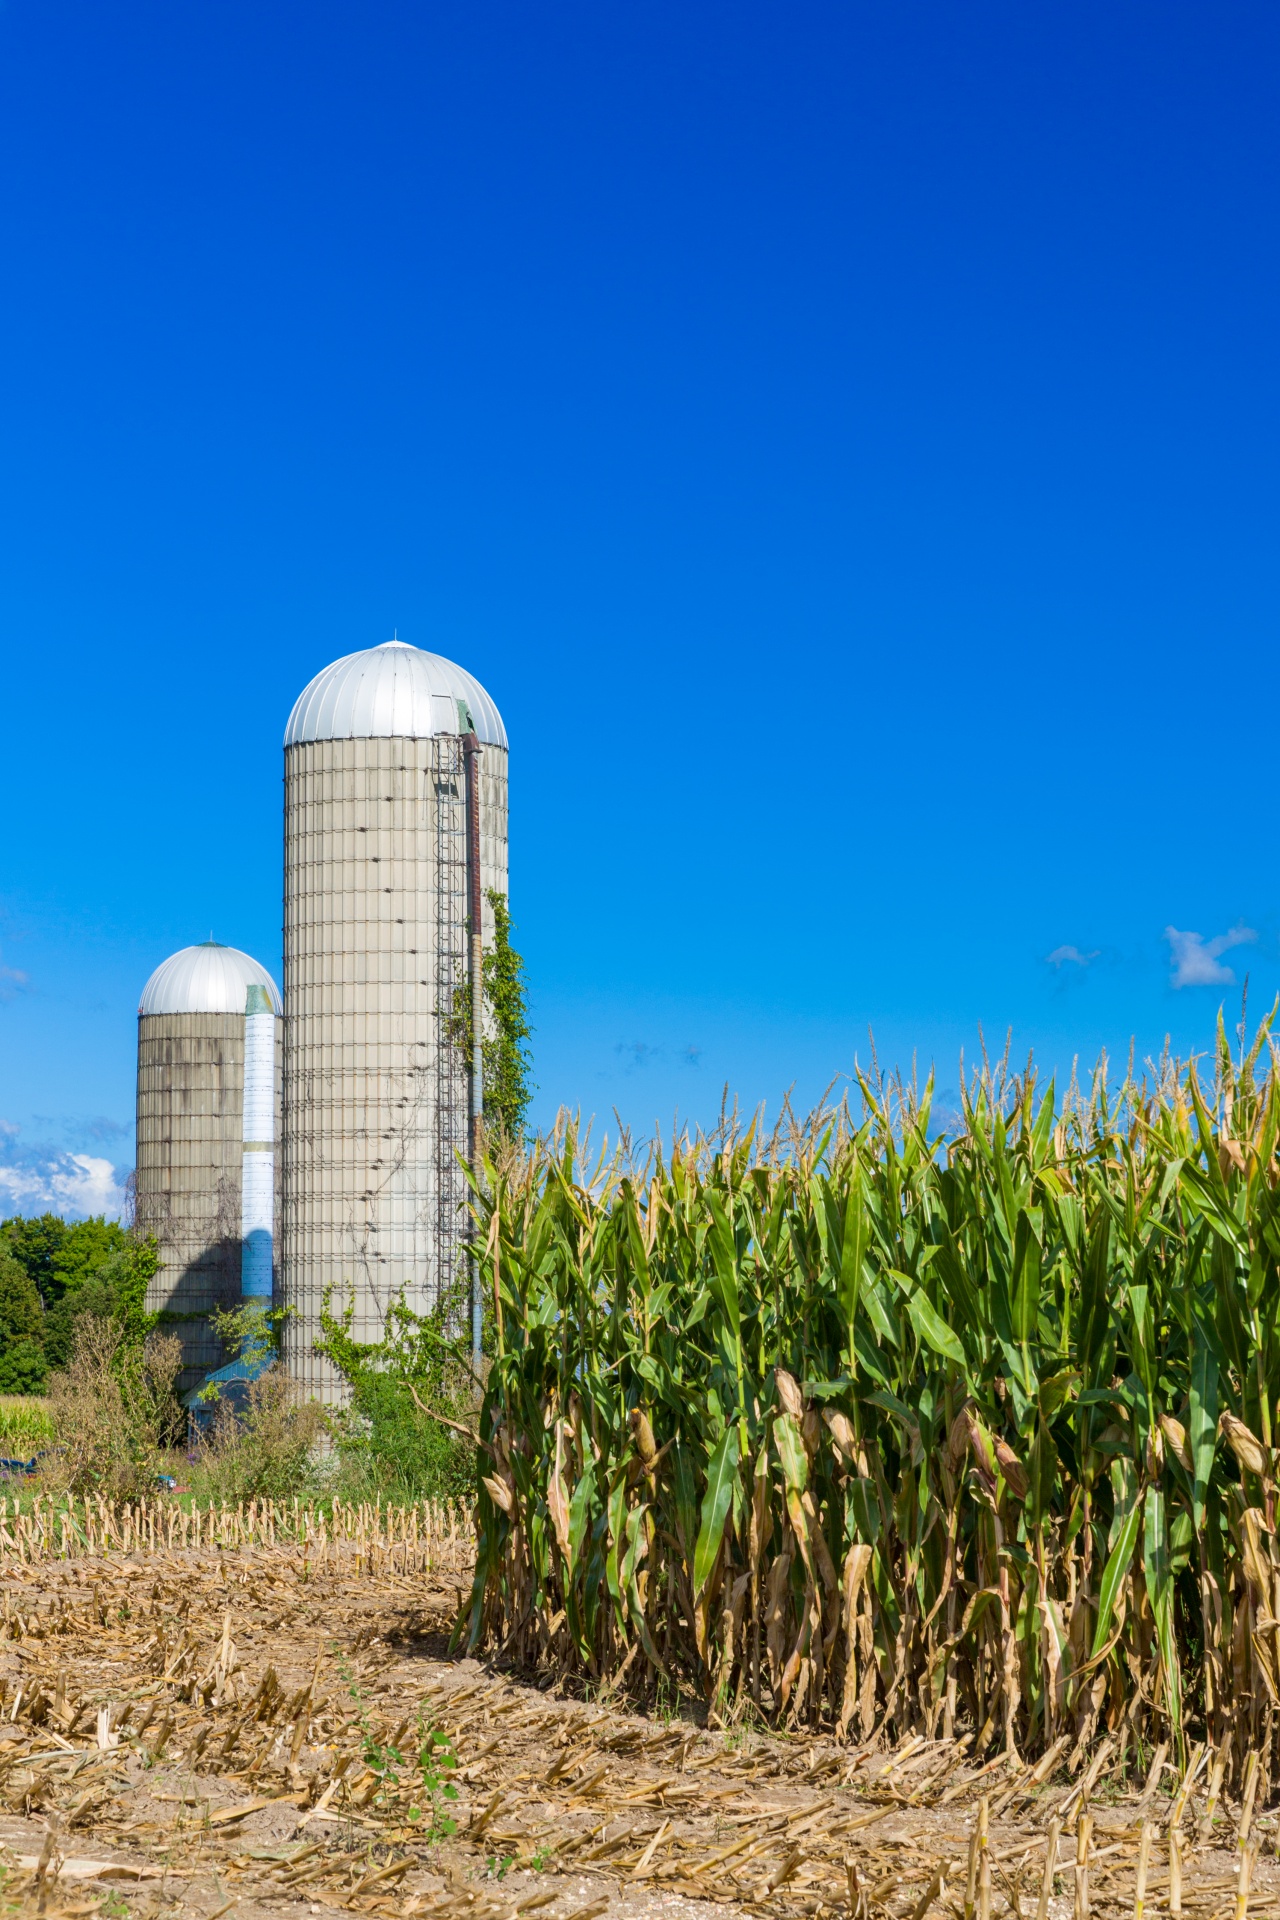 Corn field with a silo and a blue sky